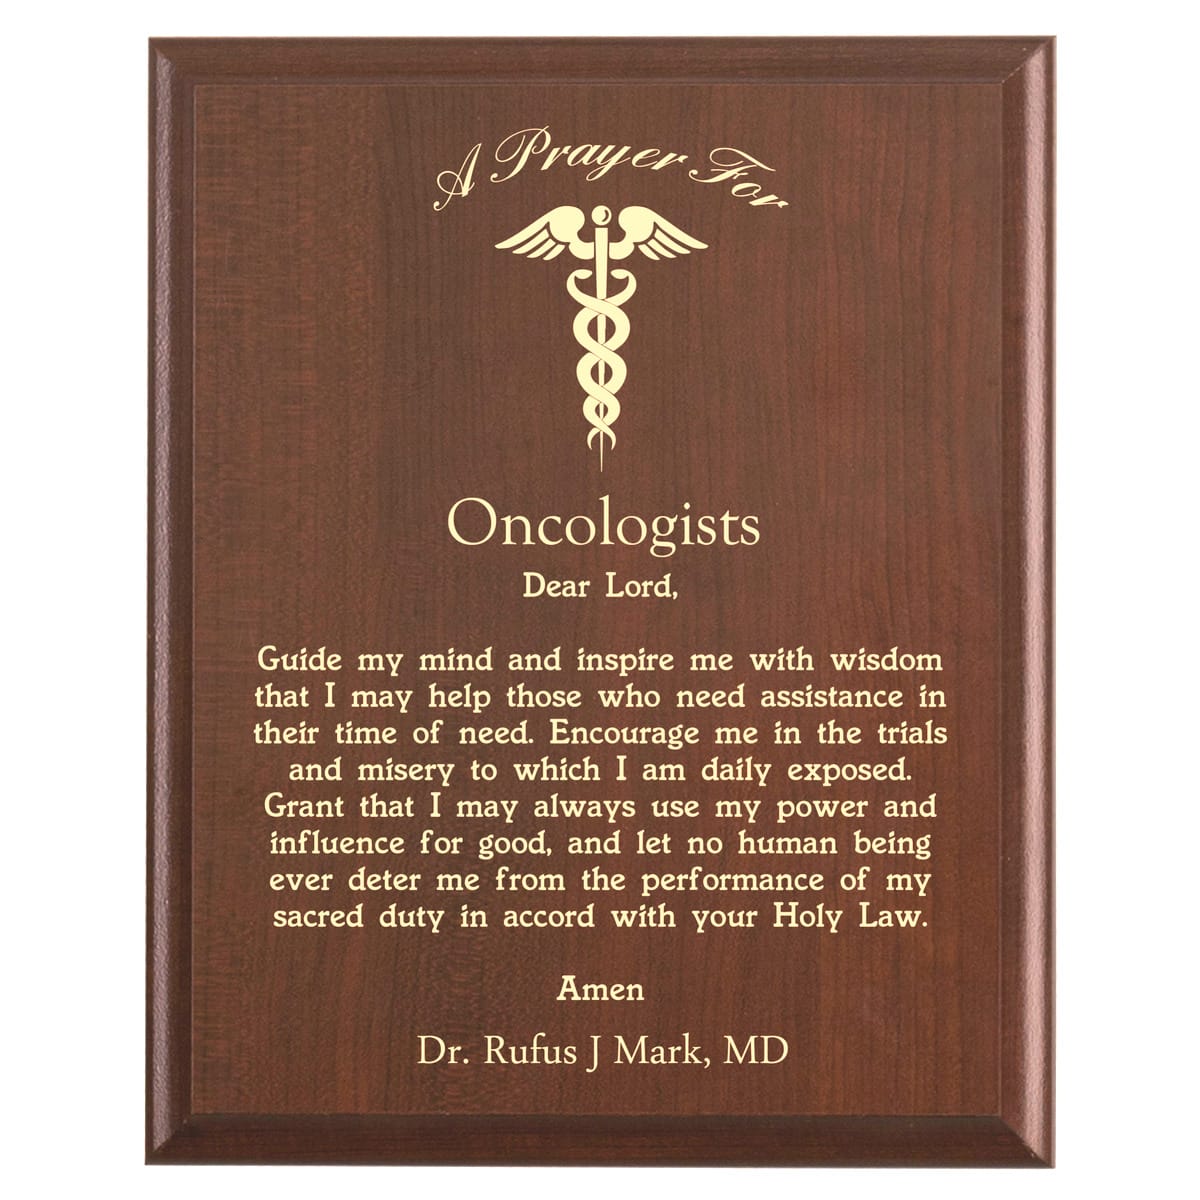 Plaque photo: Oncologists Prayer Plaque design with free personalization. Wood style finish with customized text.